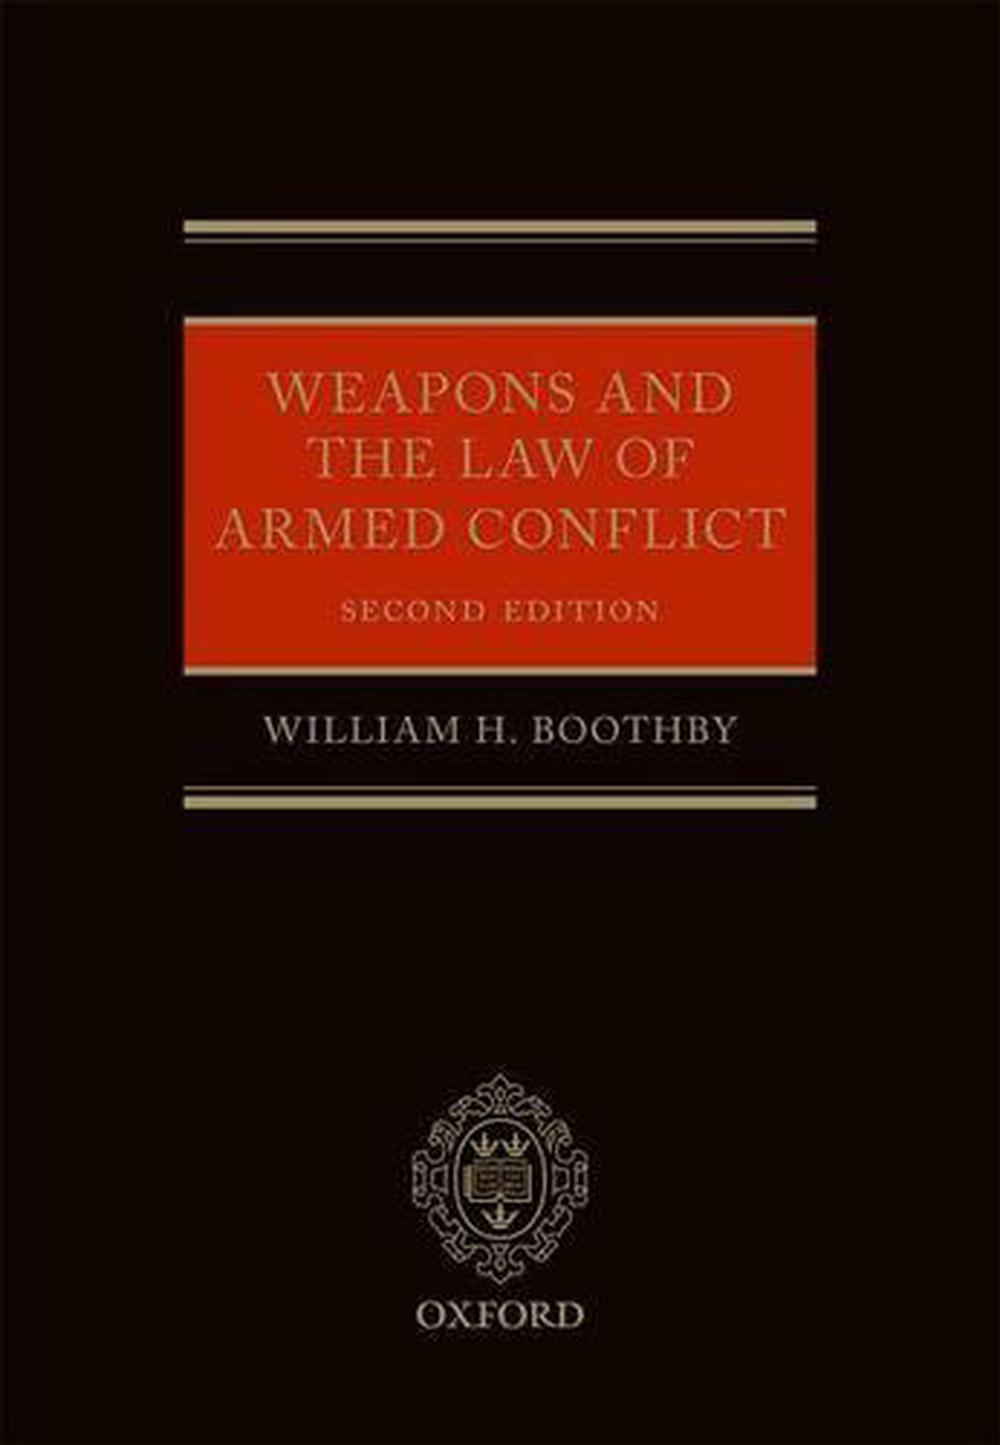 what is law of armed conflict?